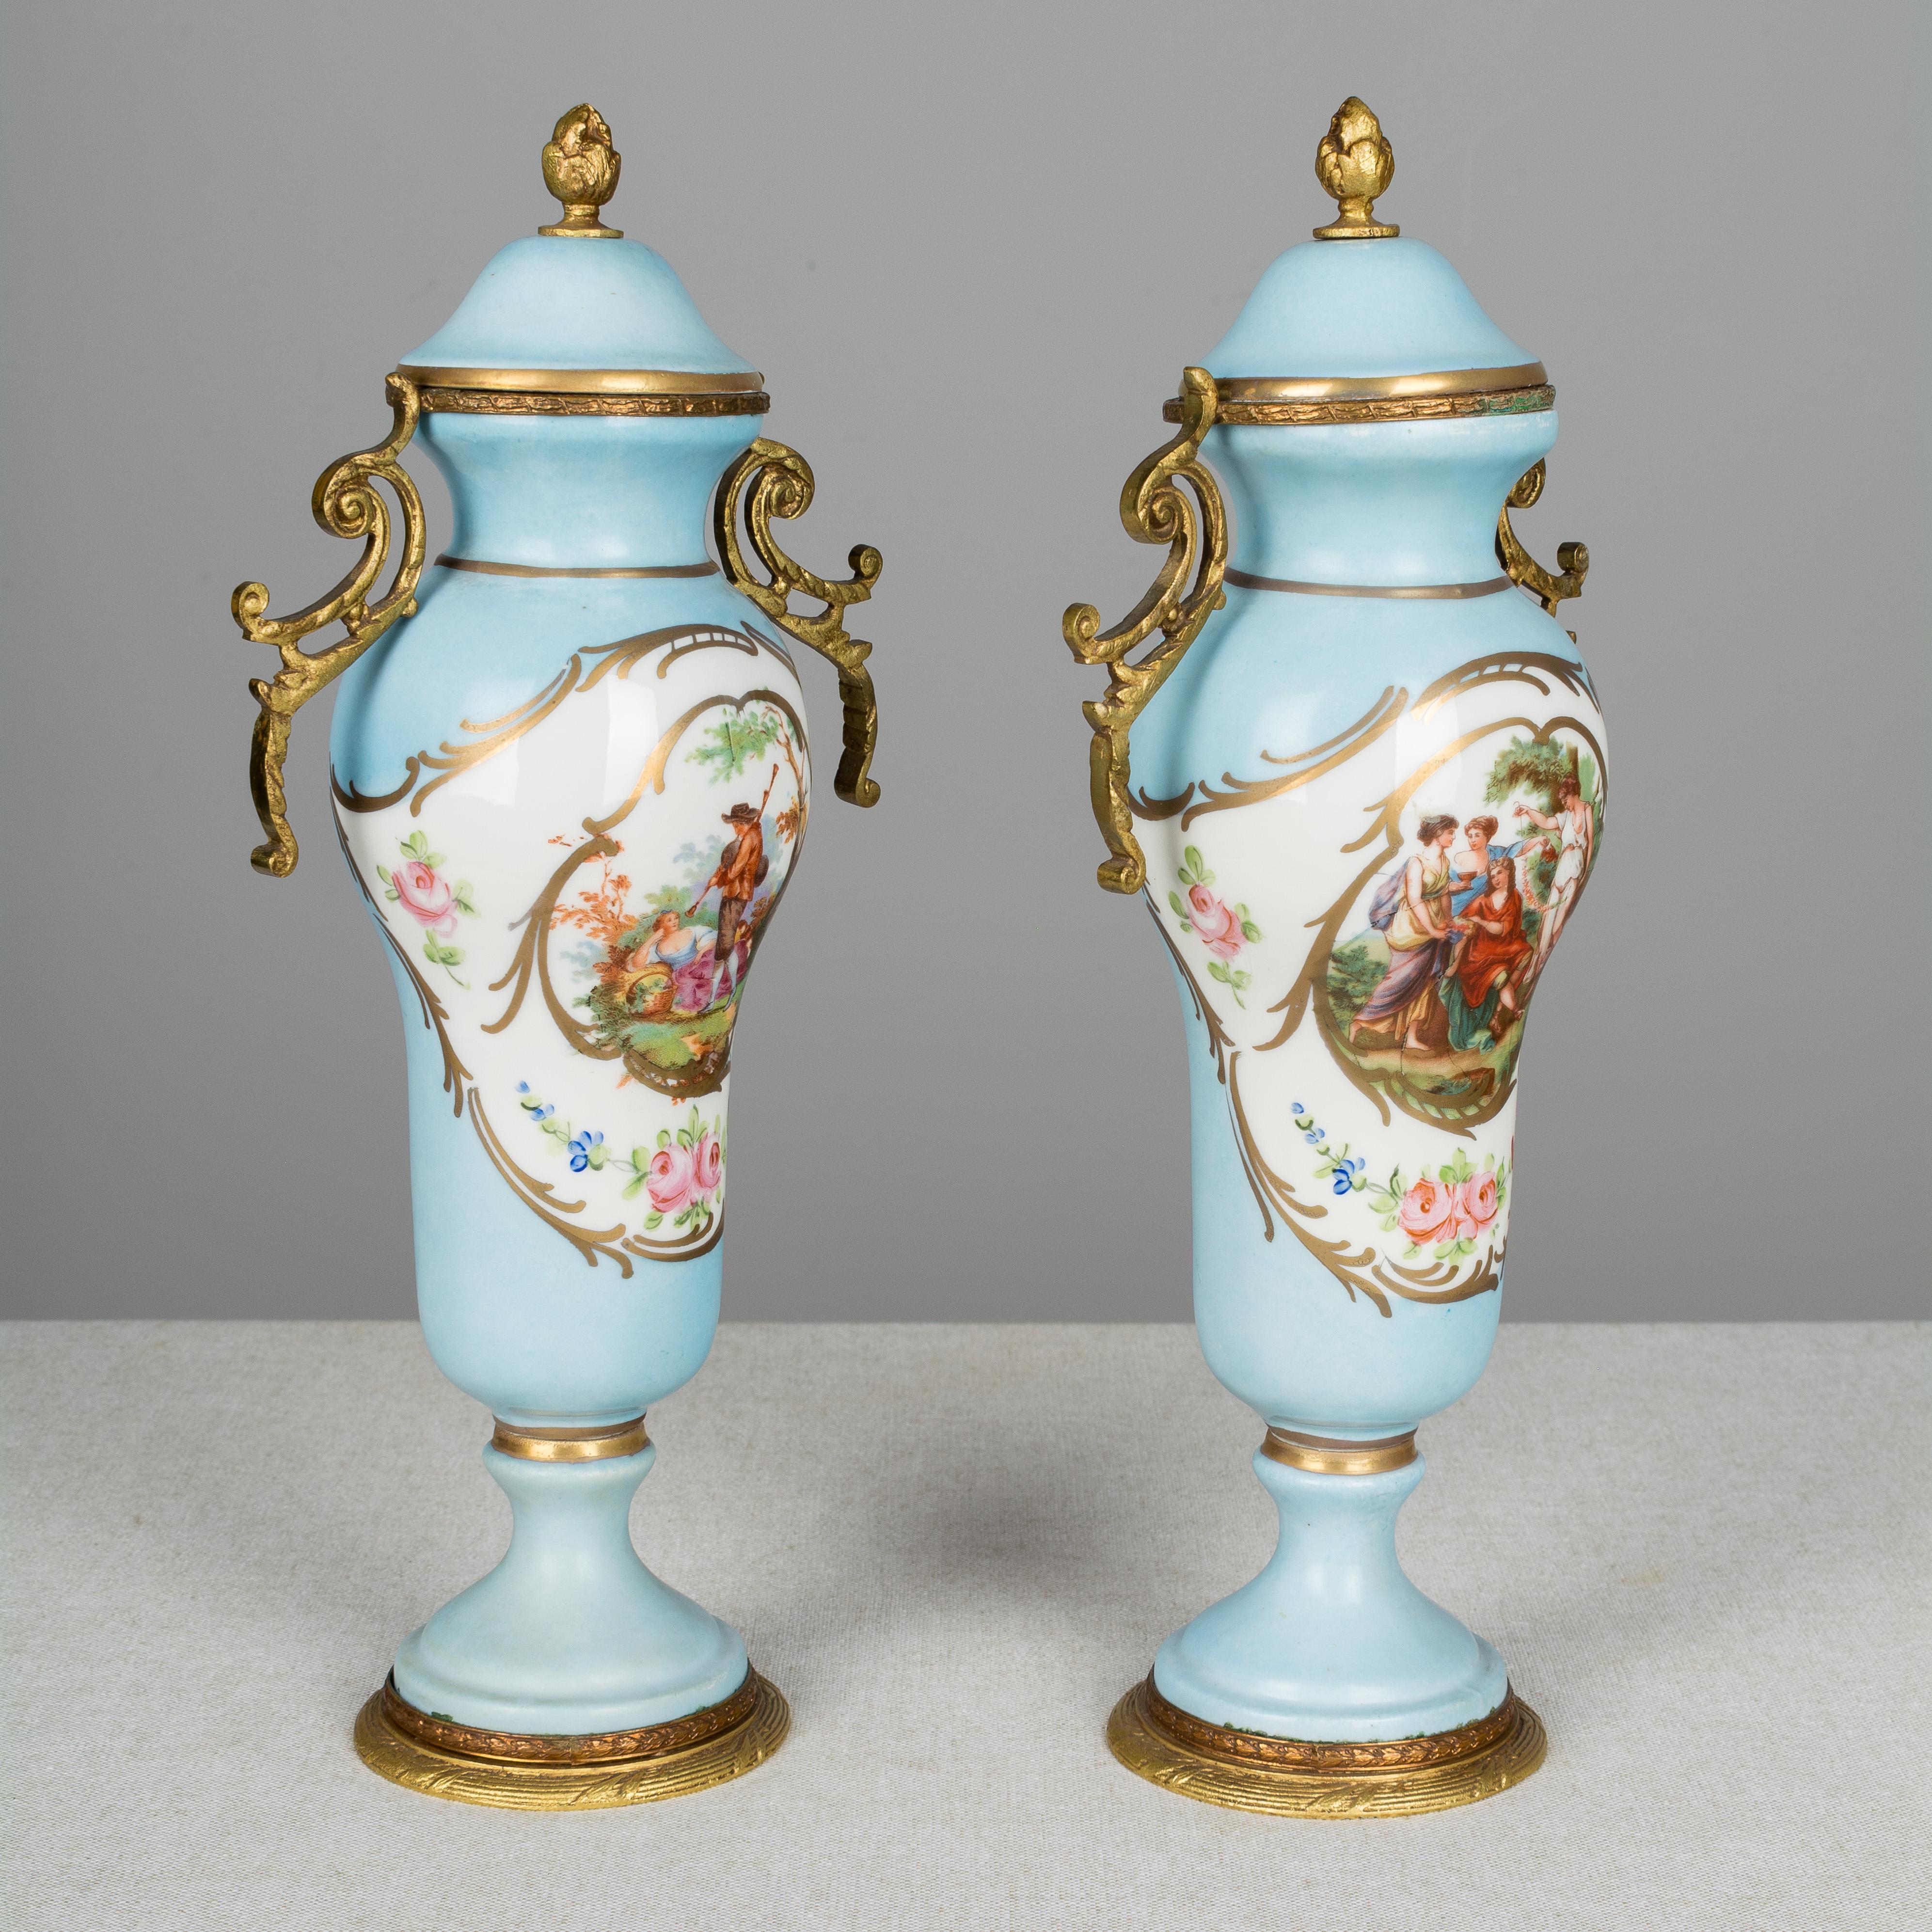 19th Century Pair of French Sèvres Porcelain Urns